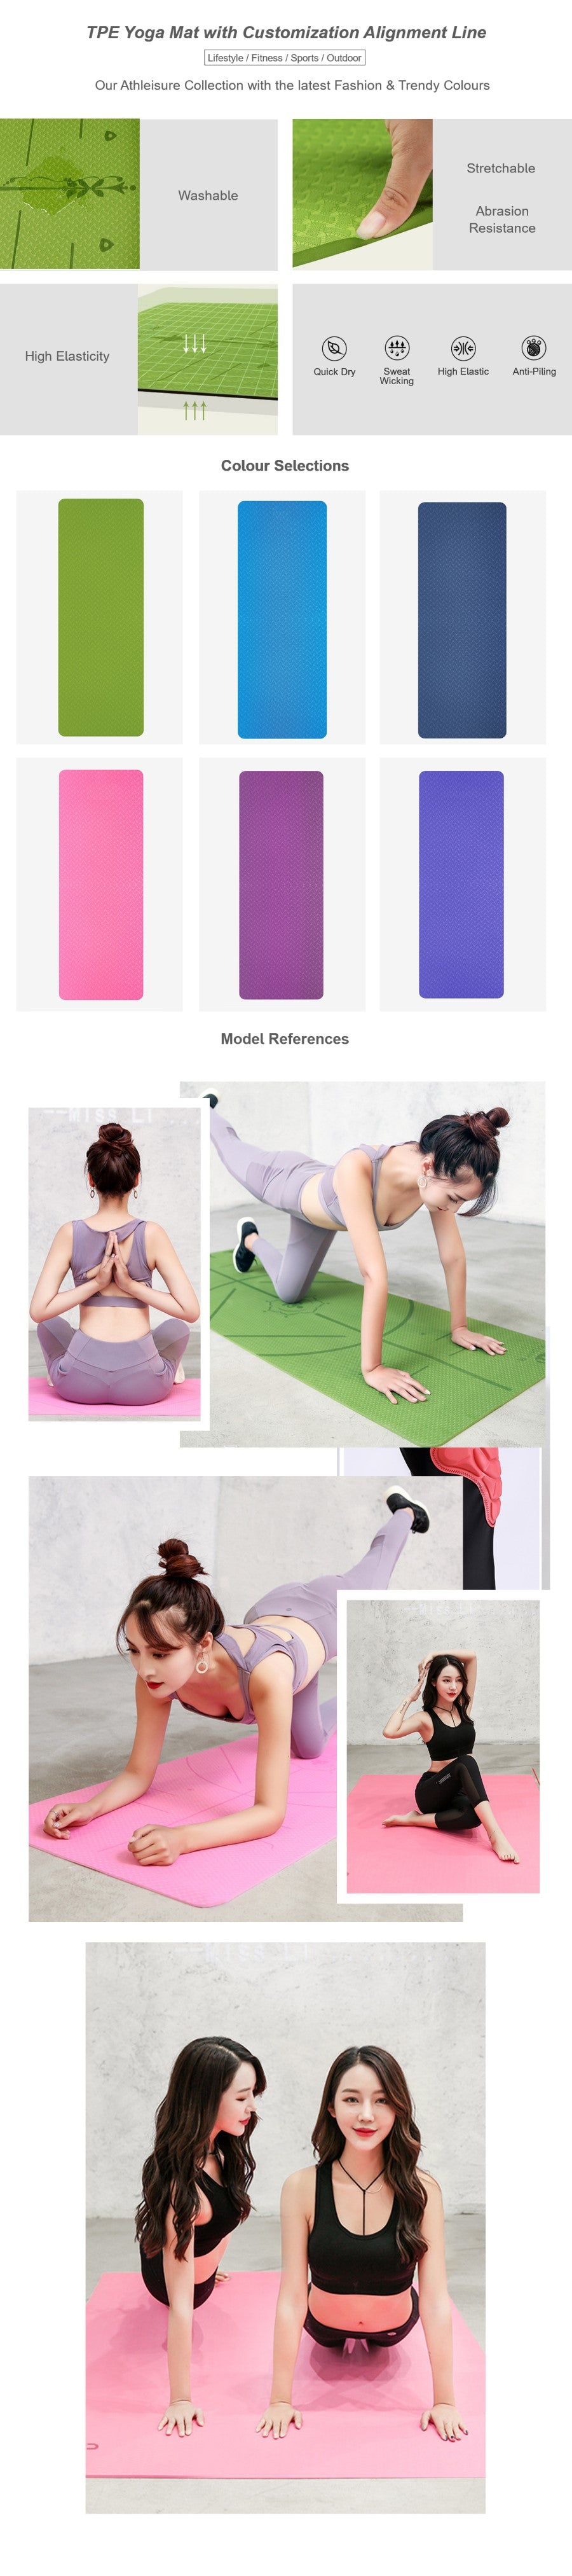 Natural Rubber Yoga Mat with Customization Alignment Line